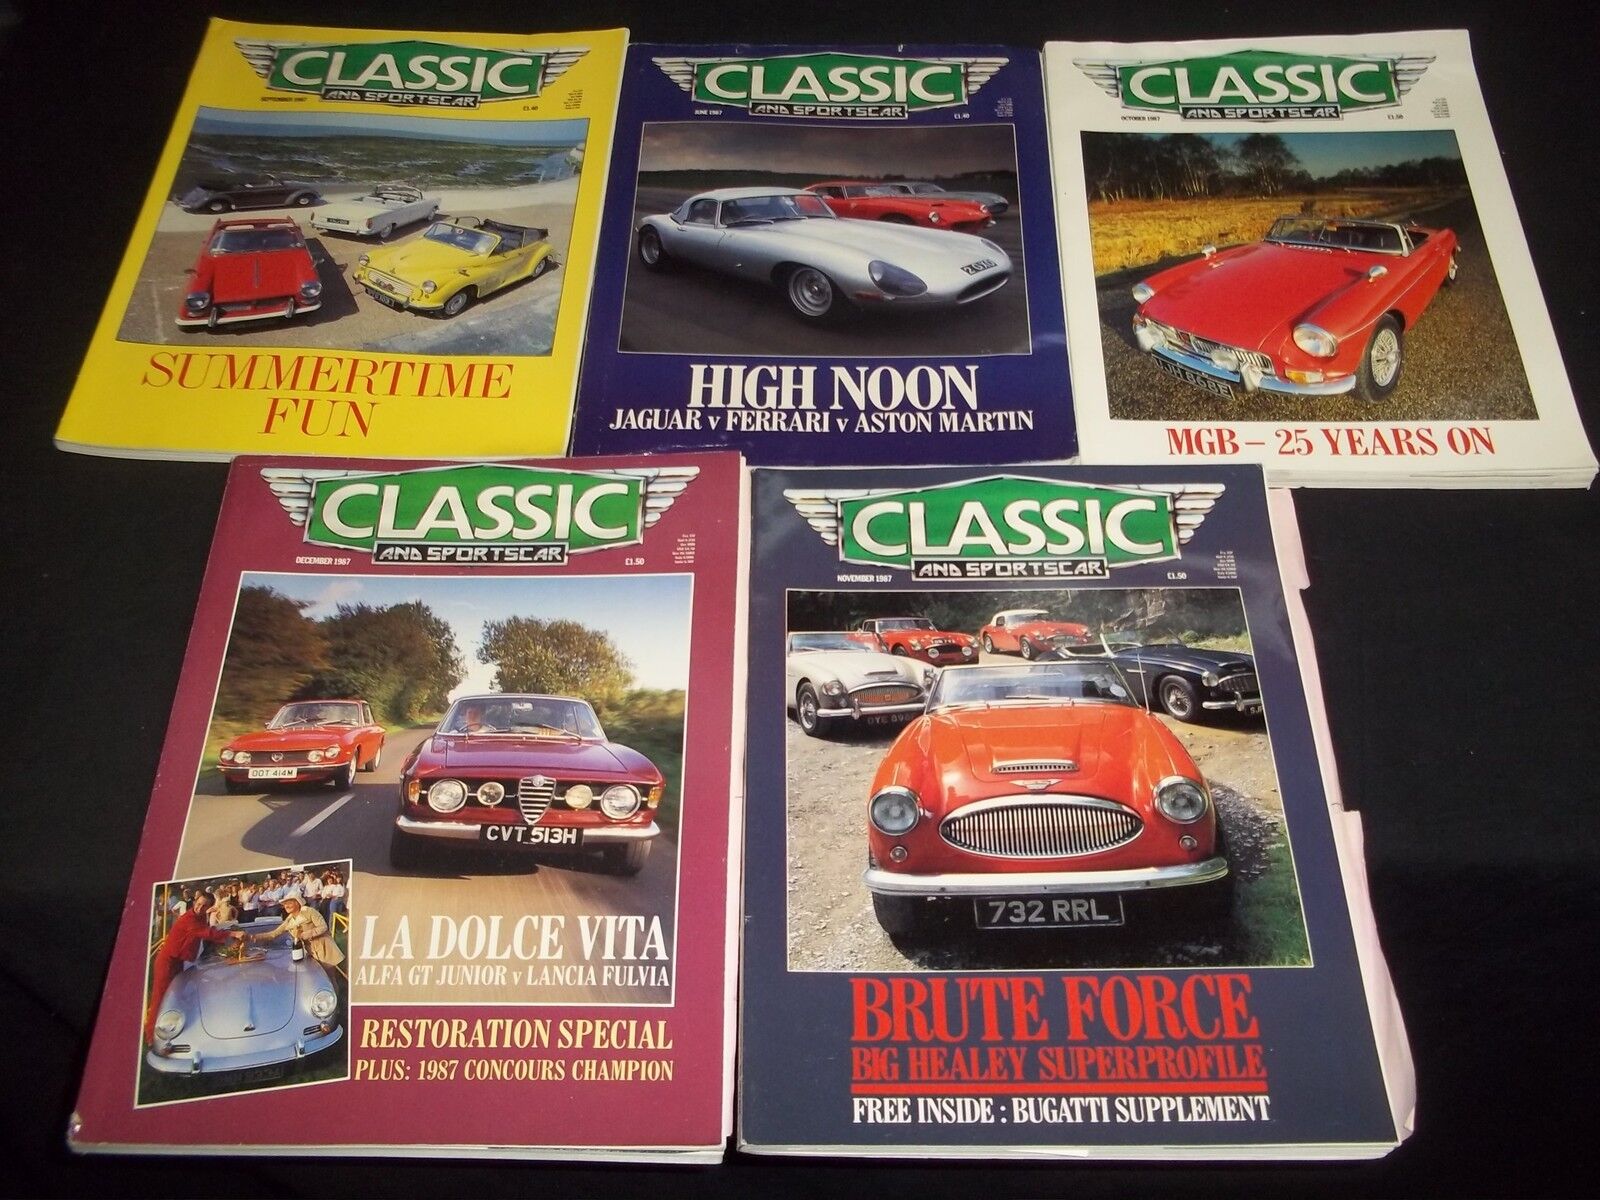 1987 CLASSIC & SPORTS CAR MAGAZINE LOT OF 7 ISSUES - NICE COVERS - M 634